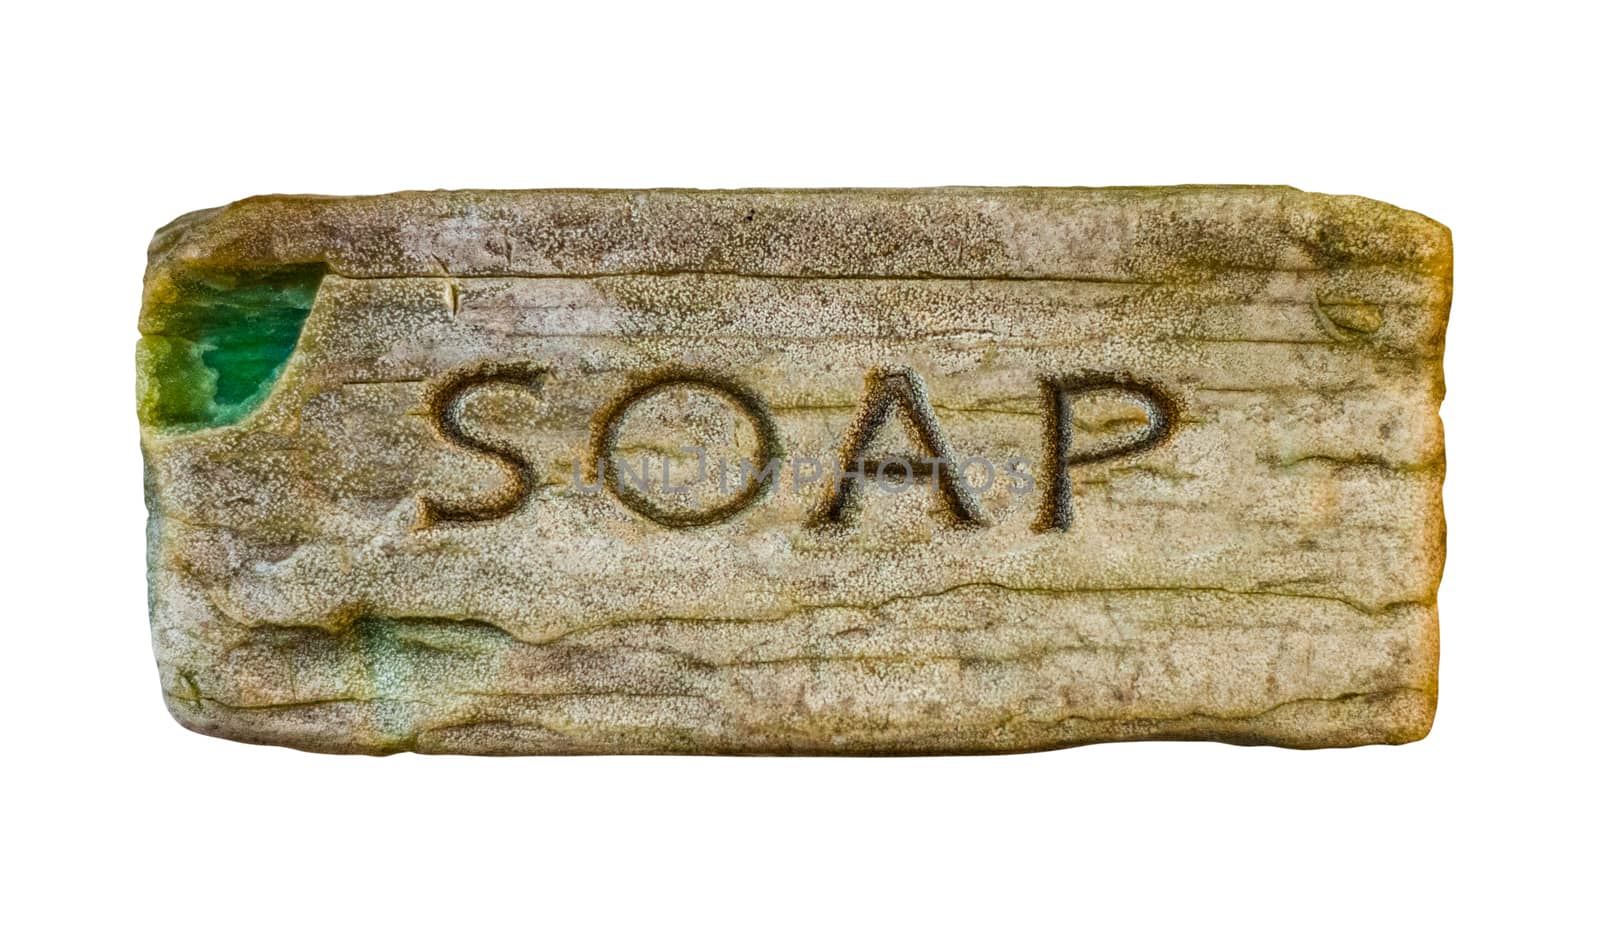 Isolated Vintage Bar Or Cake Of Soap With The Word Soap Embossed